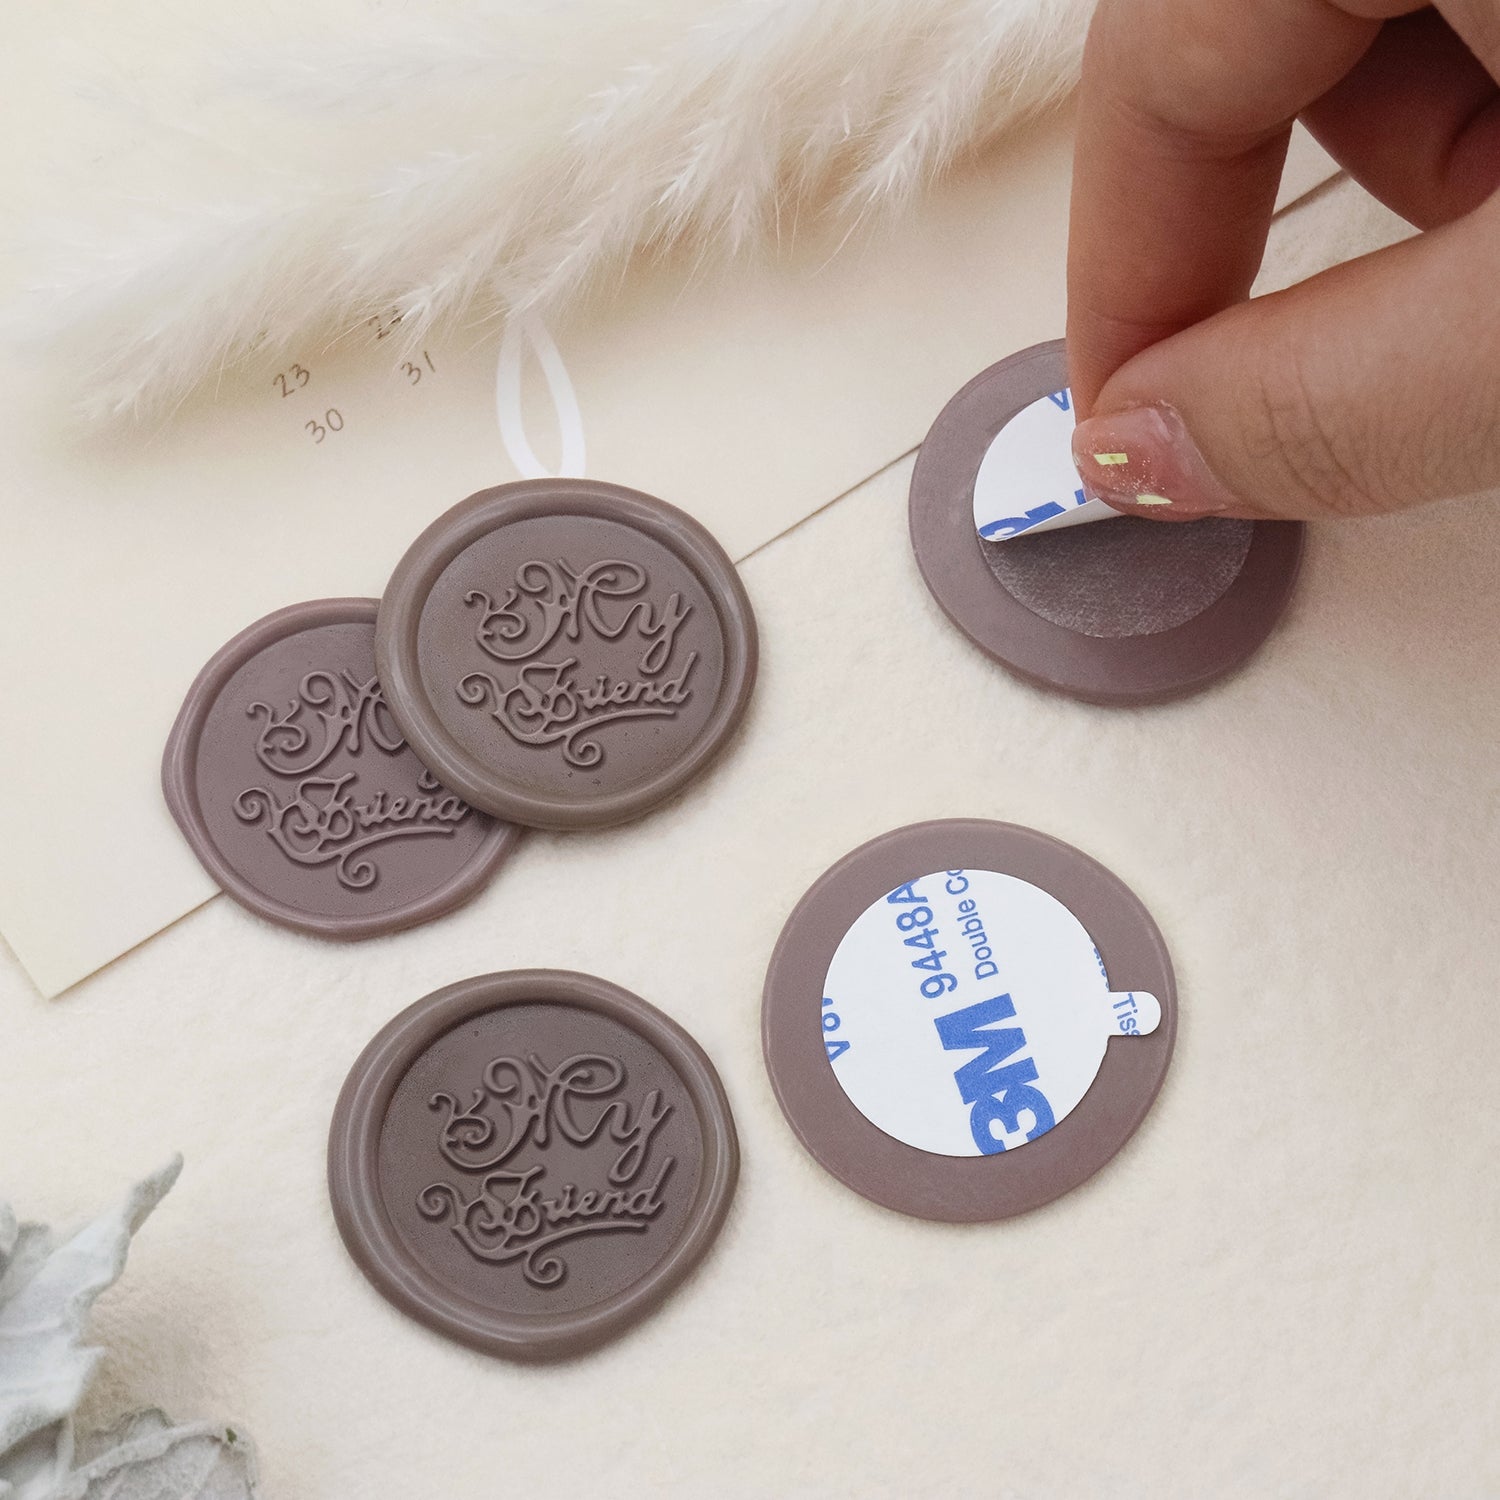 Stamprints Greeting Self-adhesive Wax Seal Stickers - My Friend 2